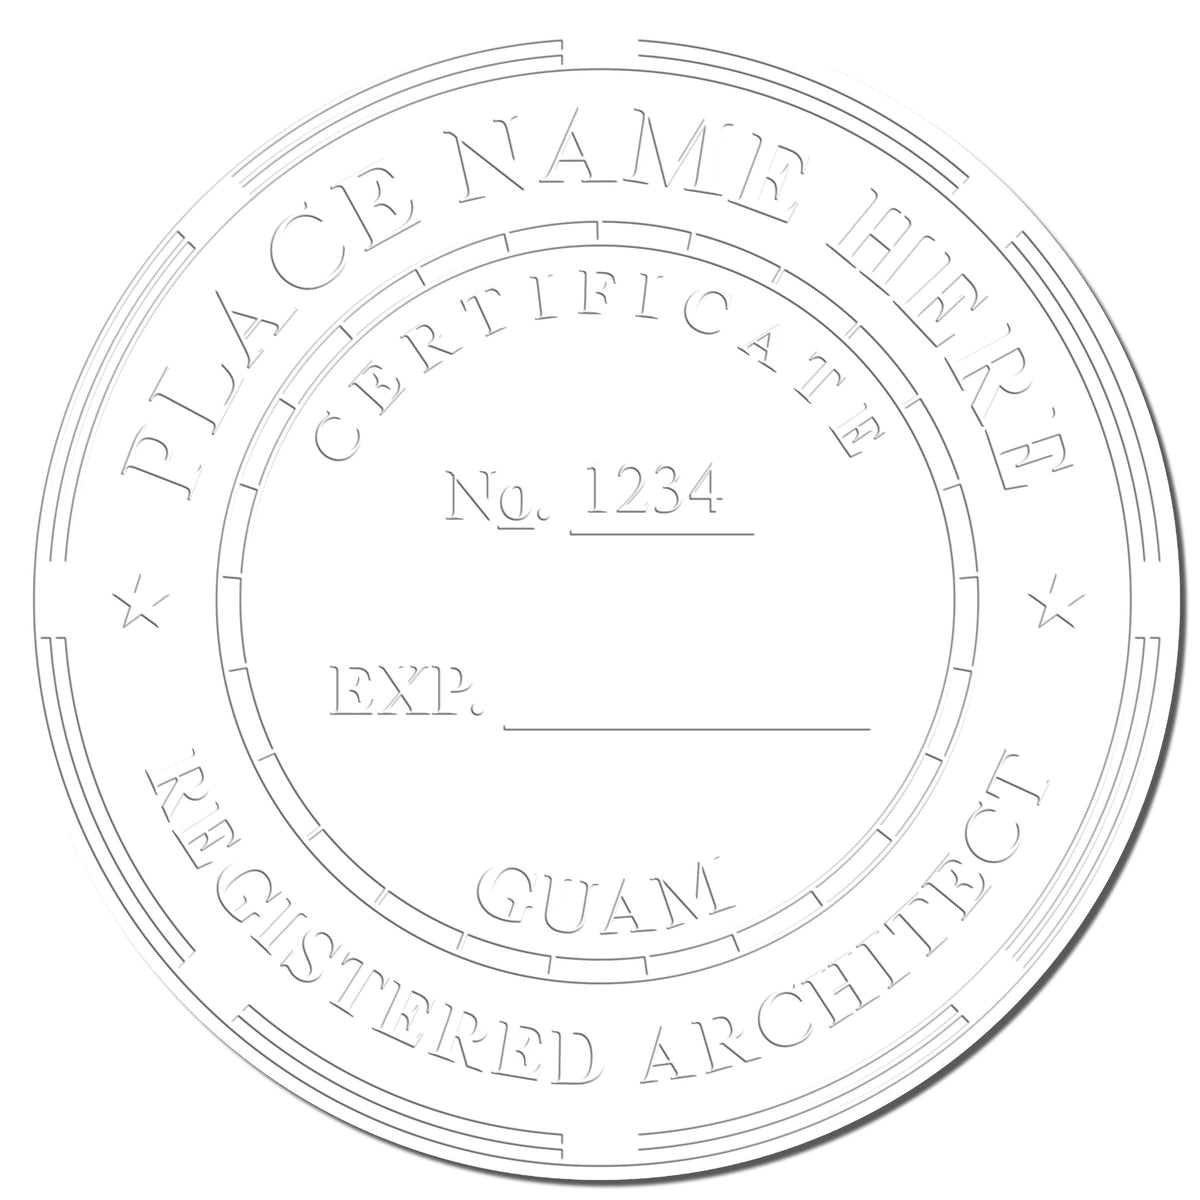 A photograph of the Handheld Guam Architect Seal Embosser stamp impression reveals a vivid, professional image of the on paper.